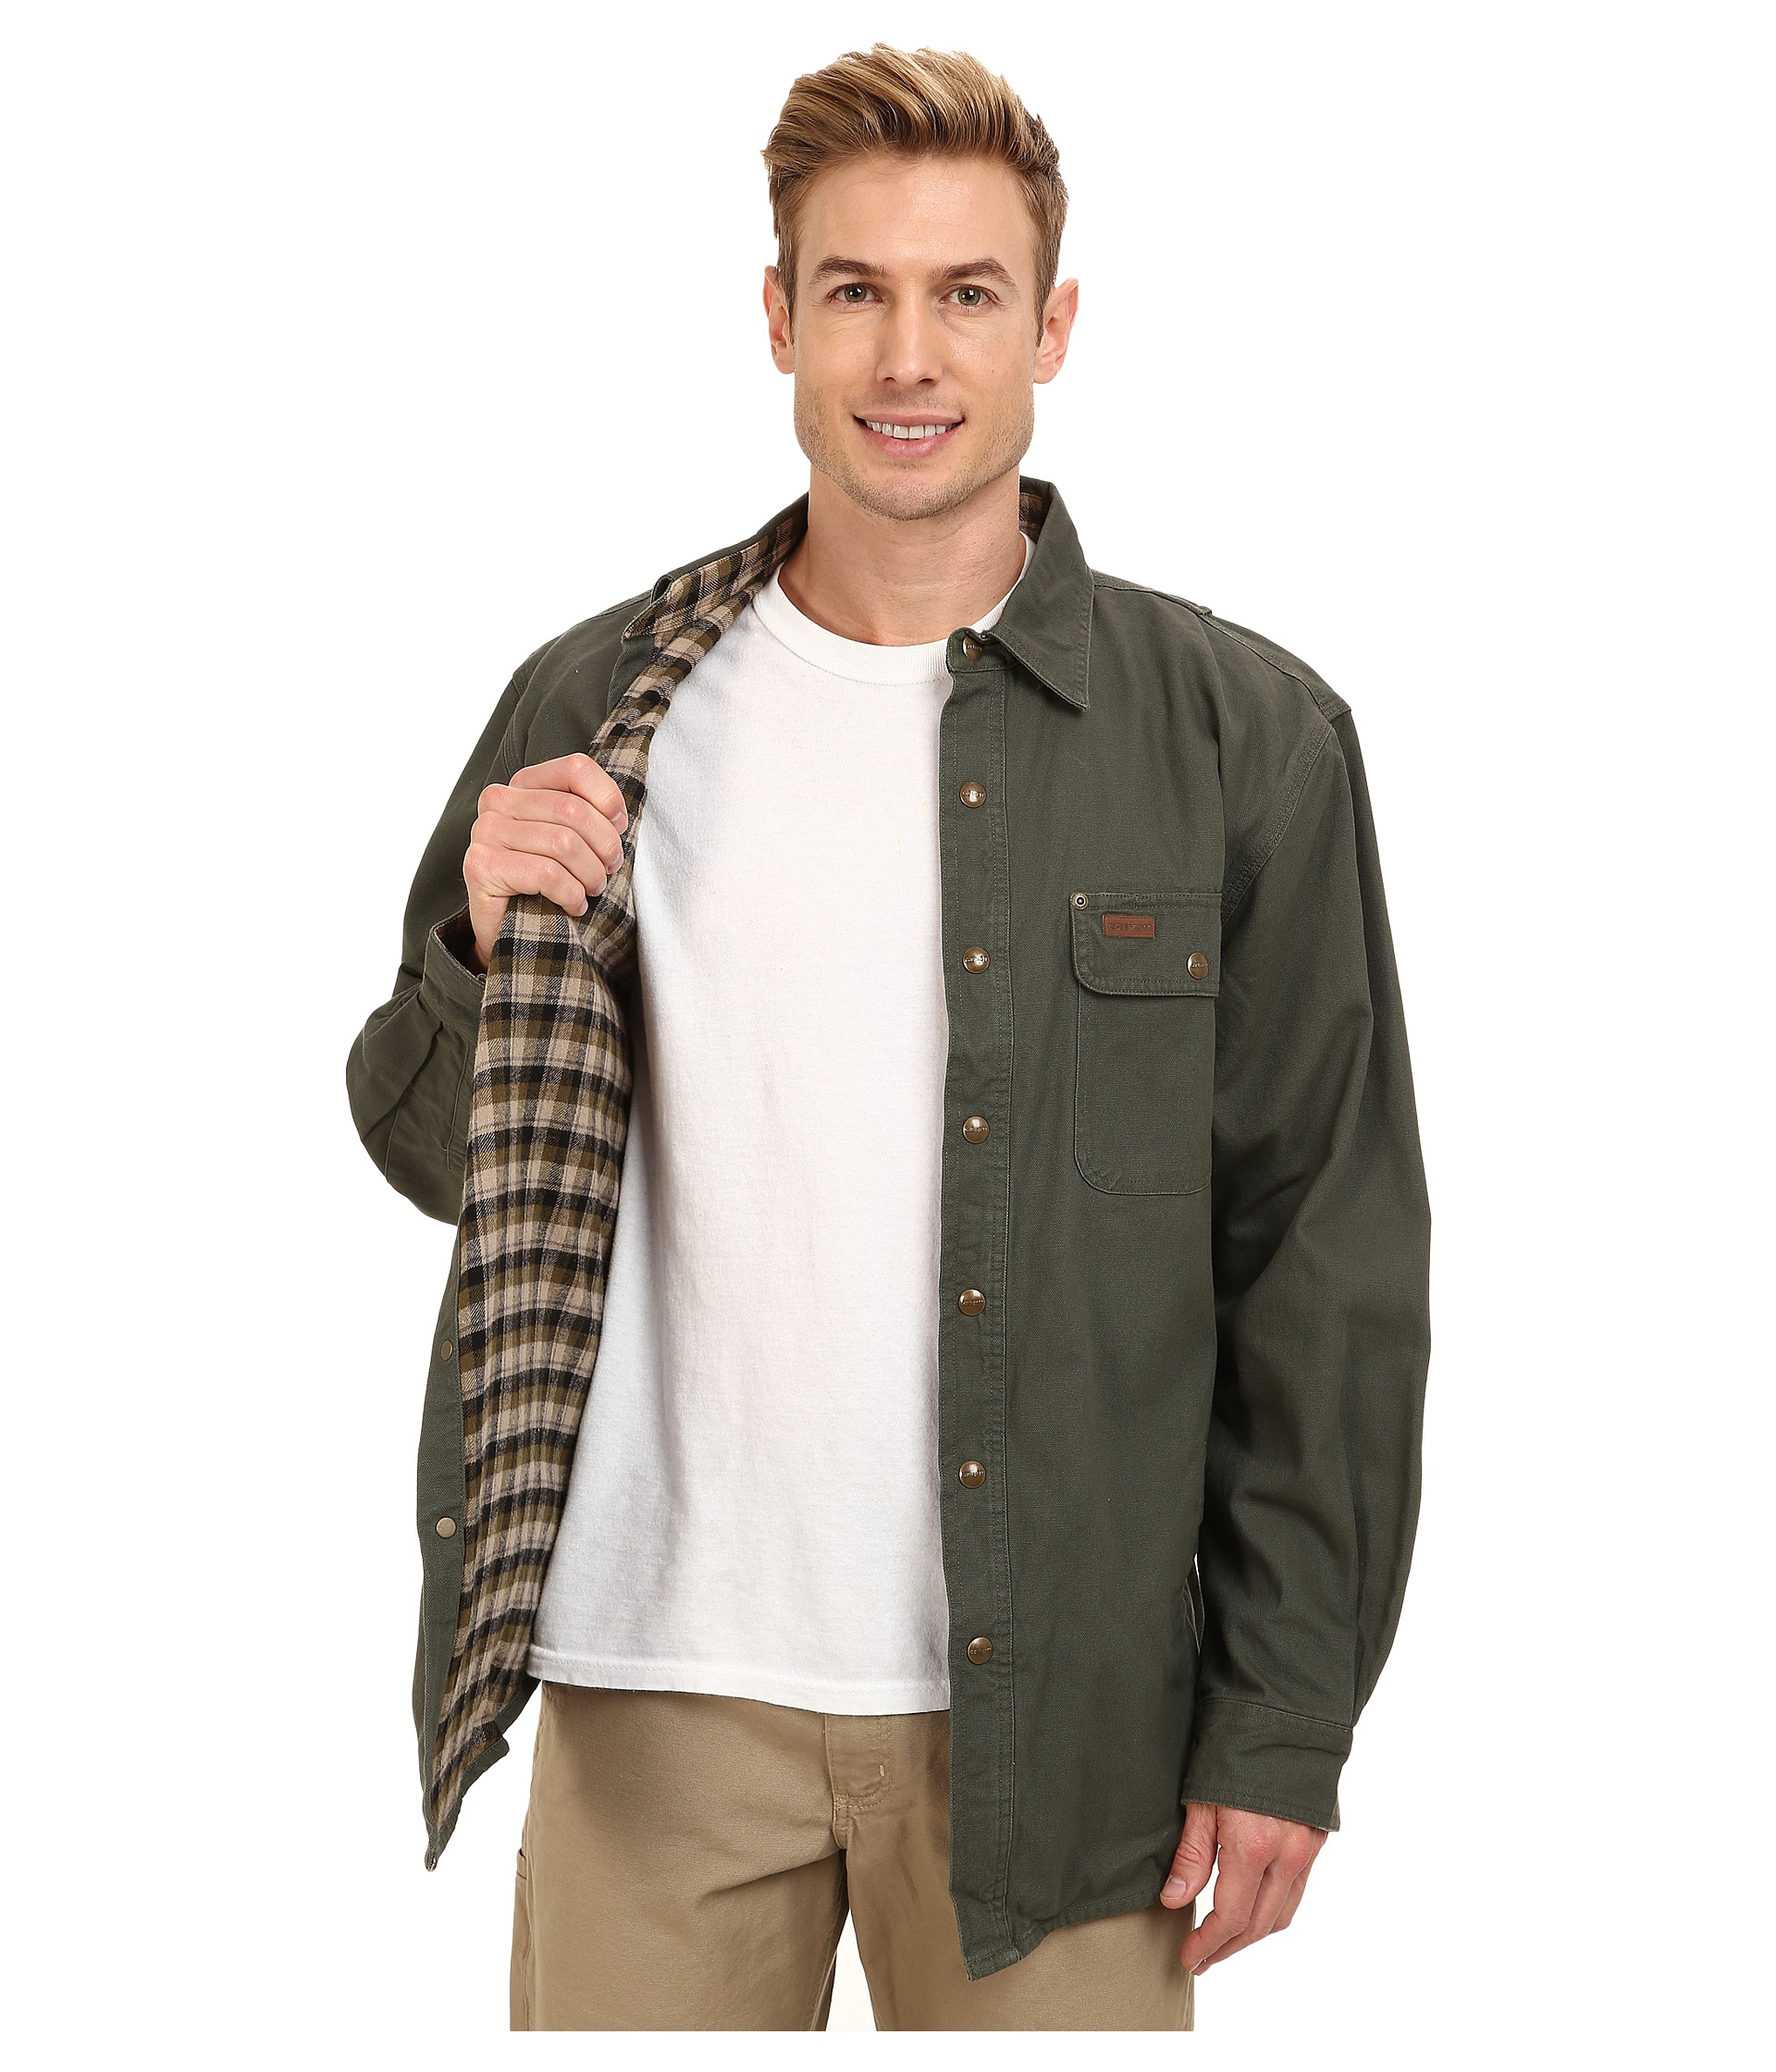 Lyst - Carhartt Weathered Canvas Shirt Jacket in Blue for Men